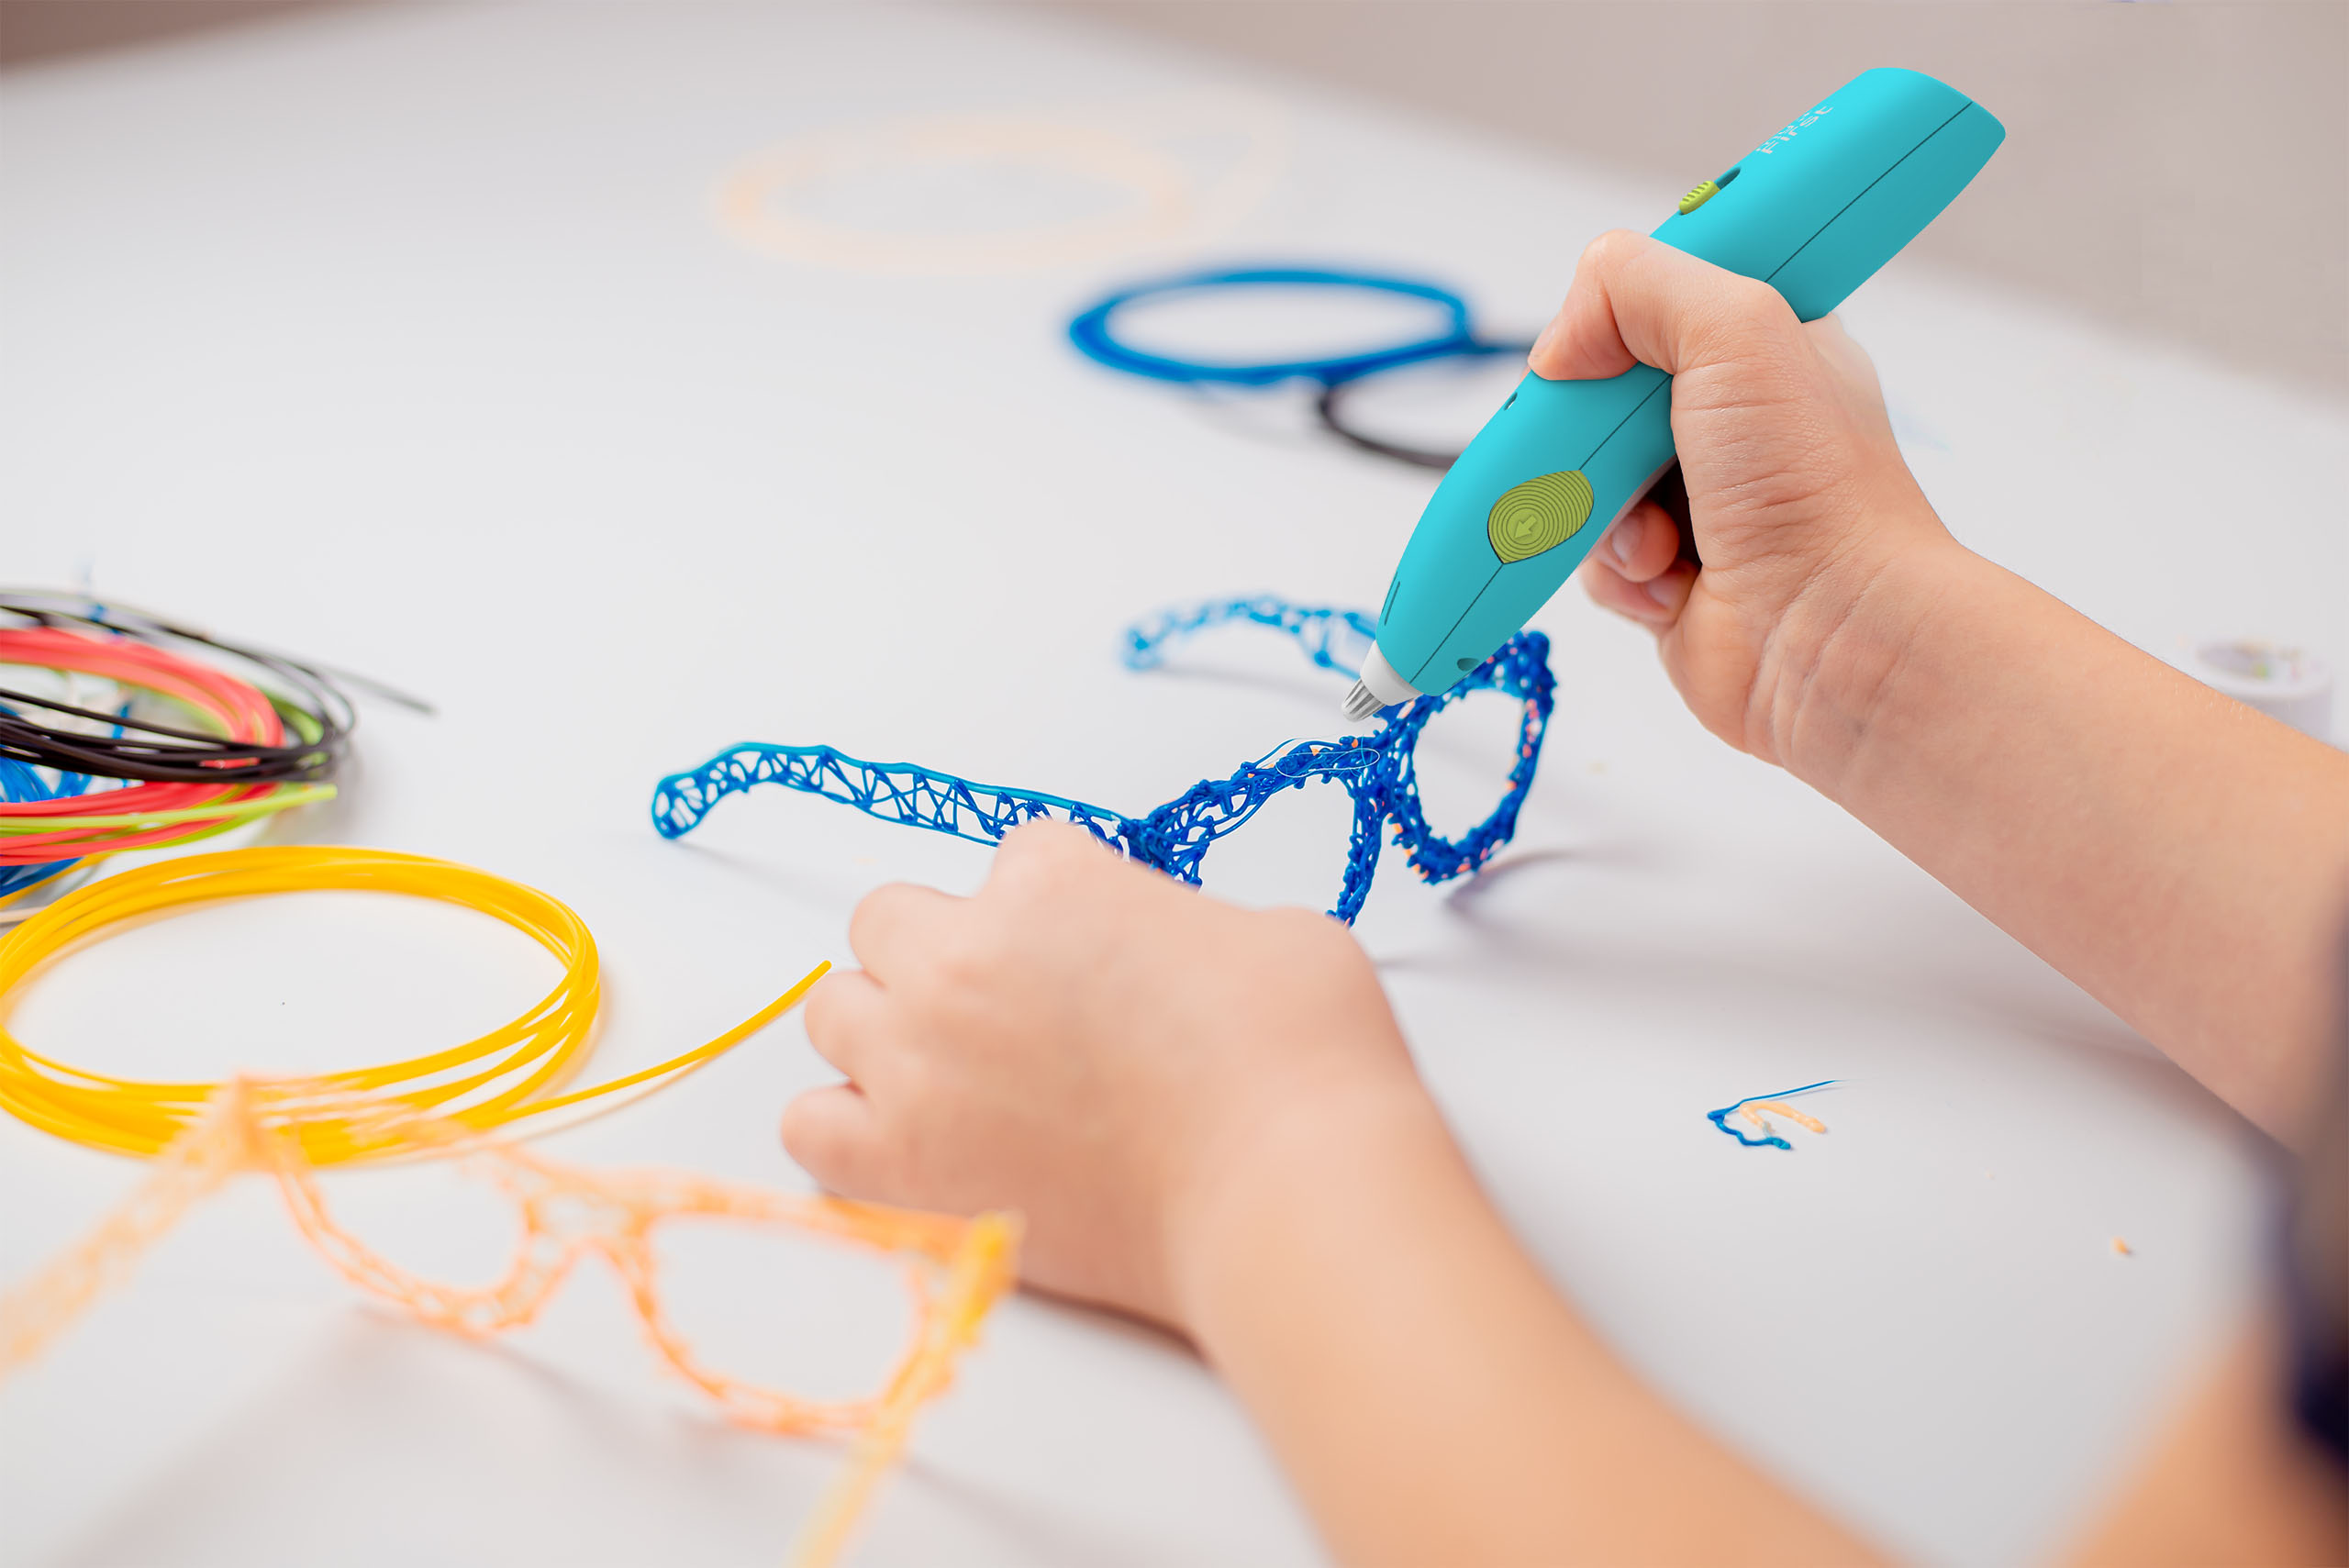 Focused child with 3d printing pen creating a toy